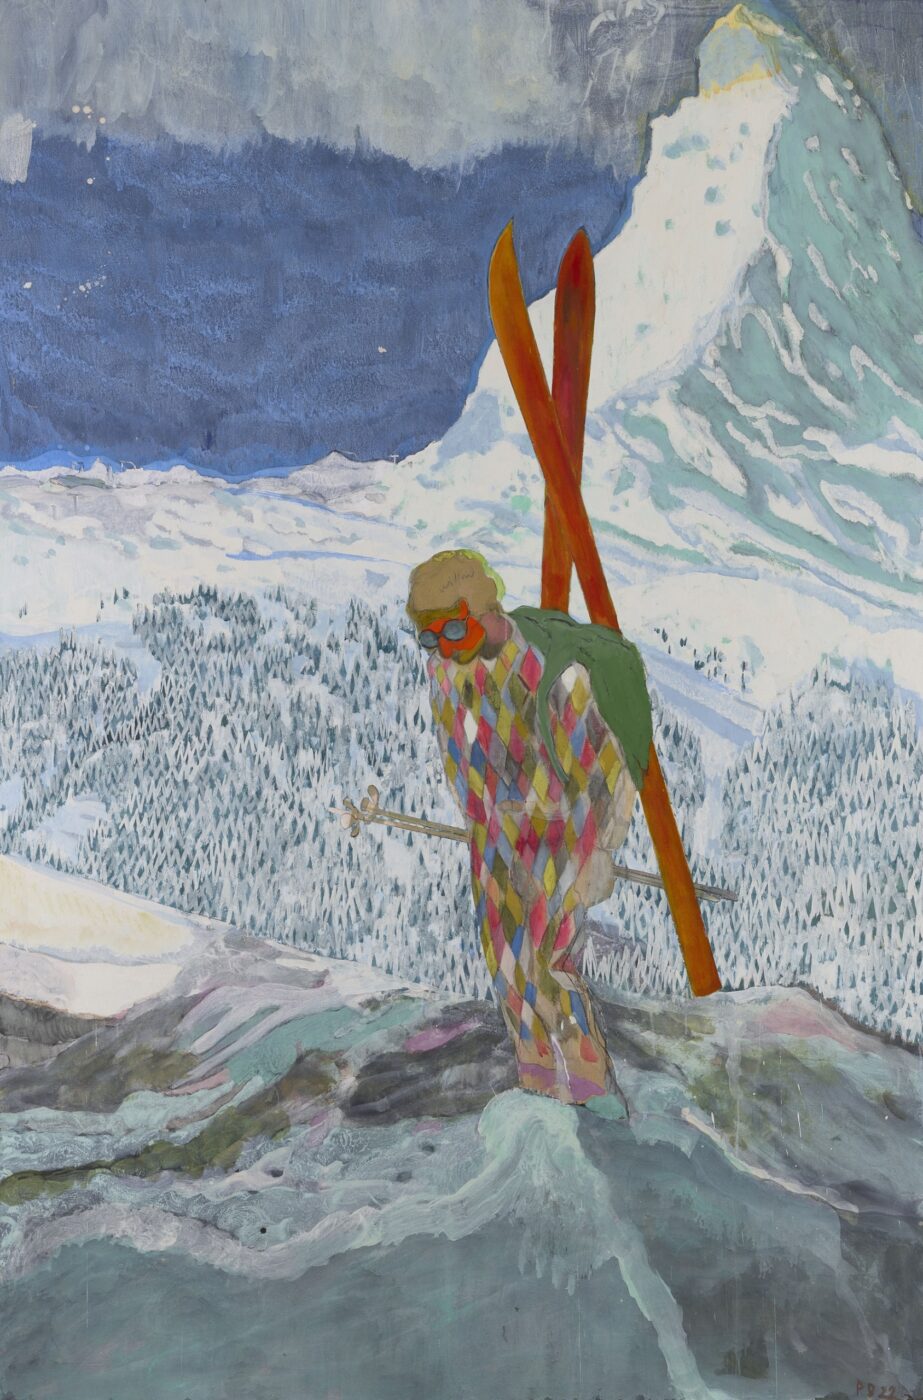 Peter Doig, the Alpinist